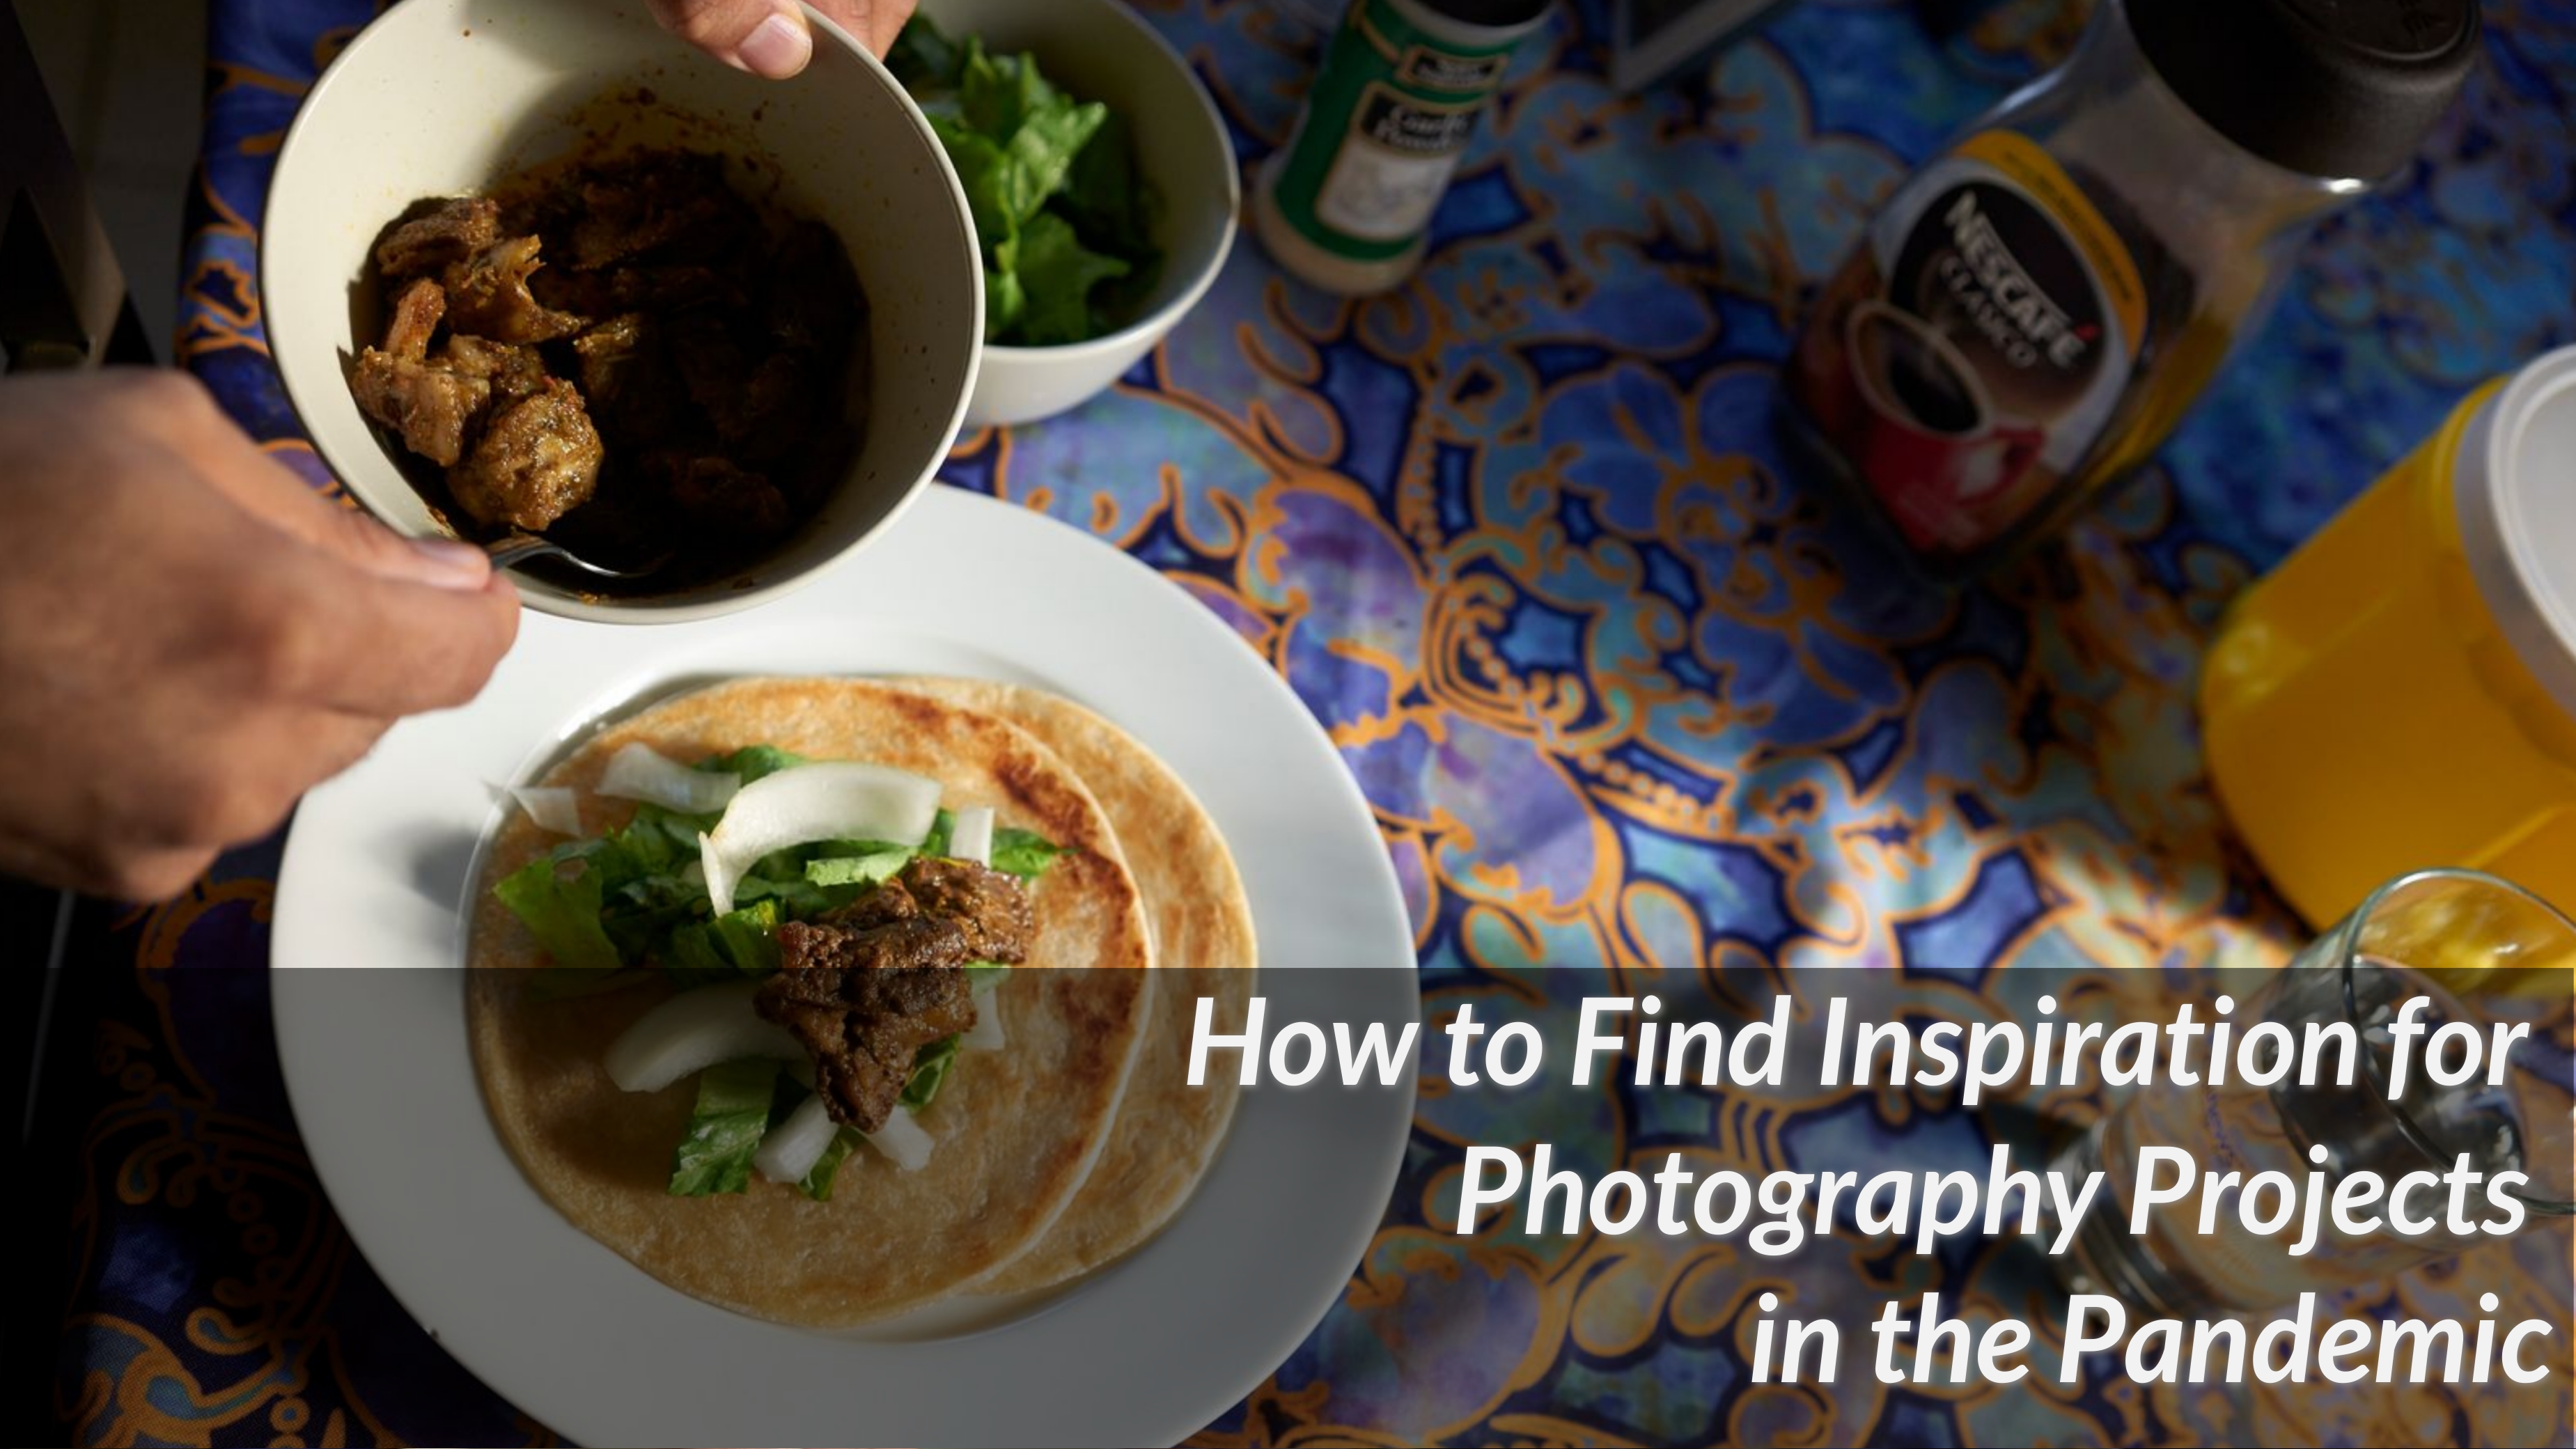 How-to-Find-Inspiration-for-Photography-Projects-in-the-Pandemic (1)